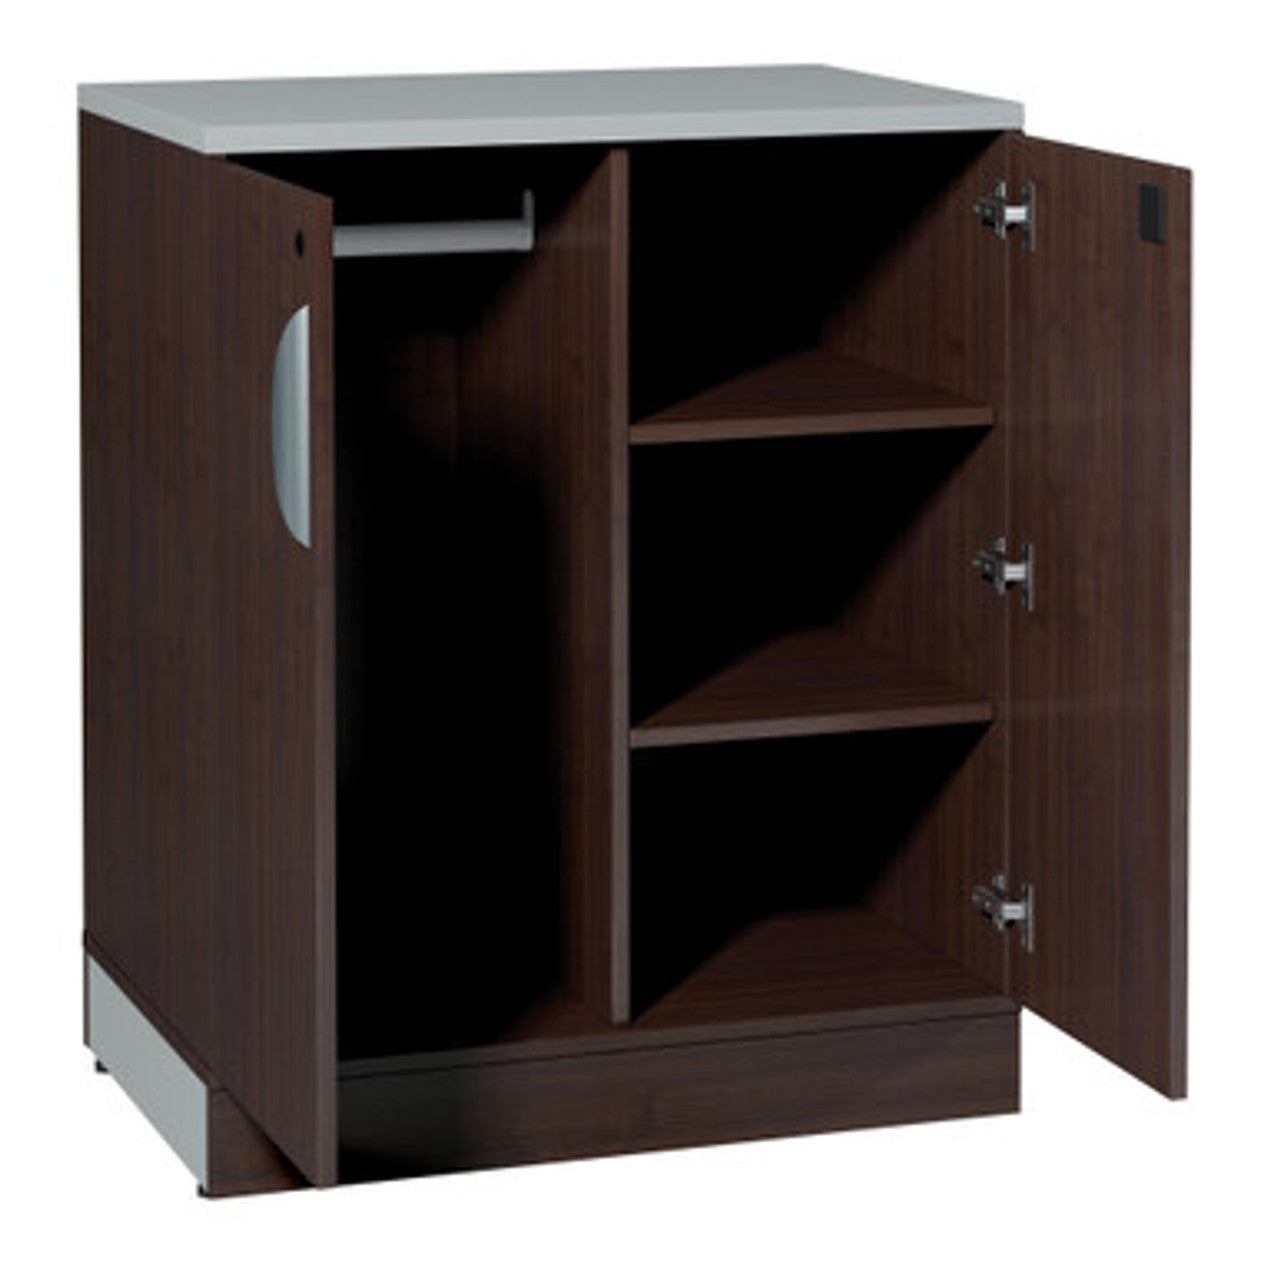 RCN3222WB - Cosmo Collection Wardrobe/Bookcase by Office Source